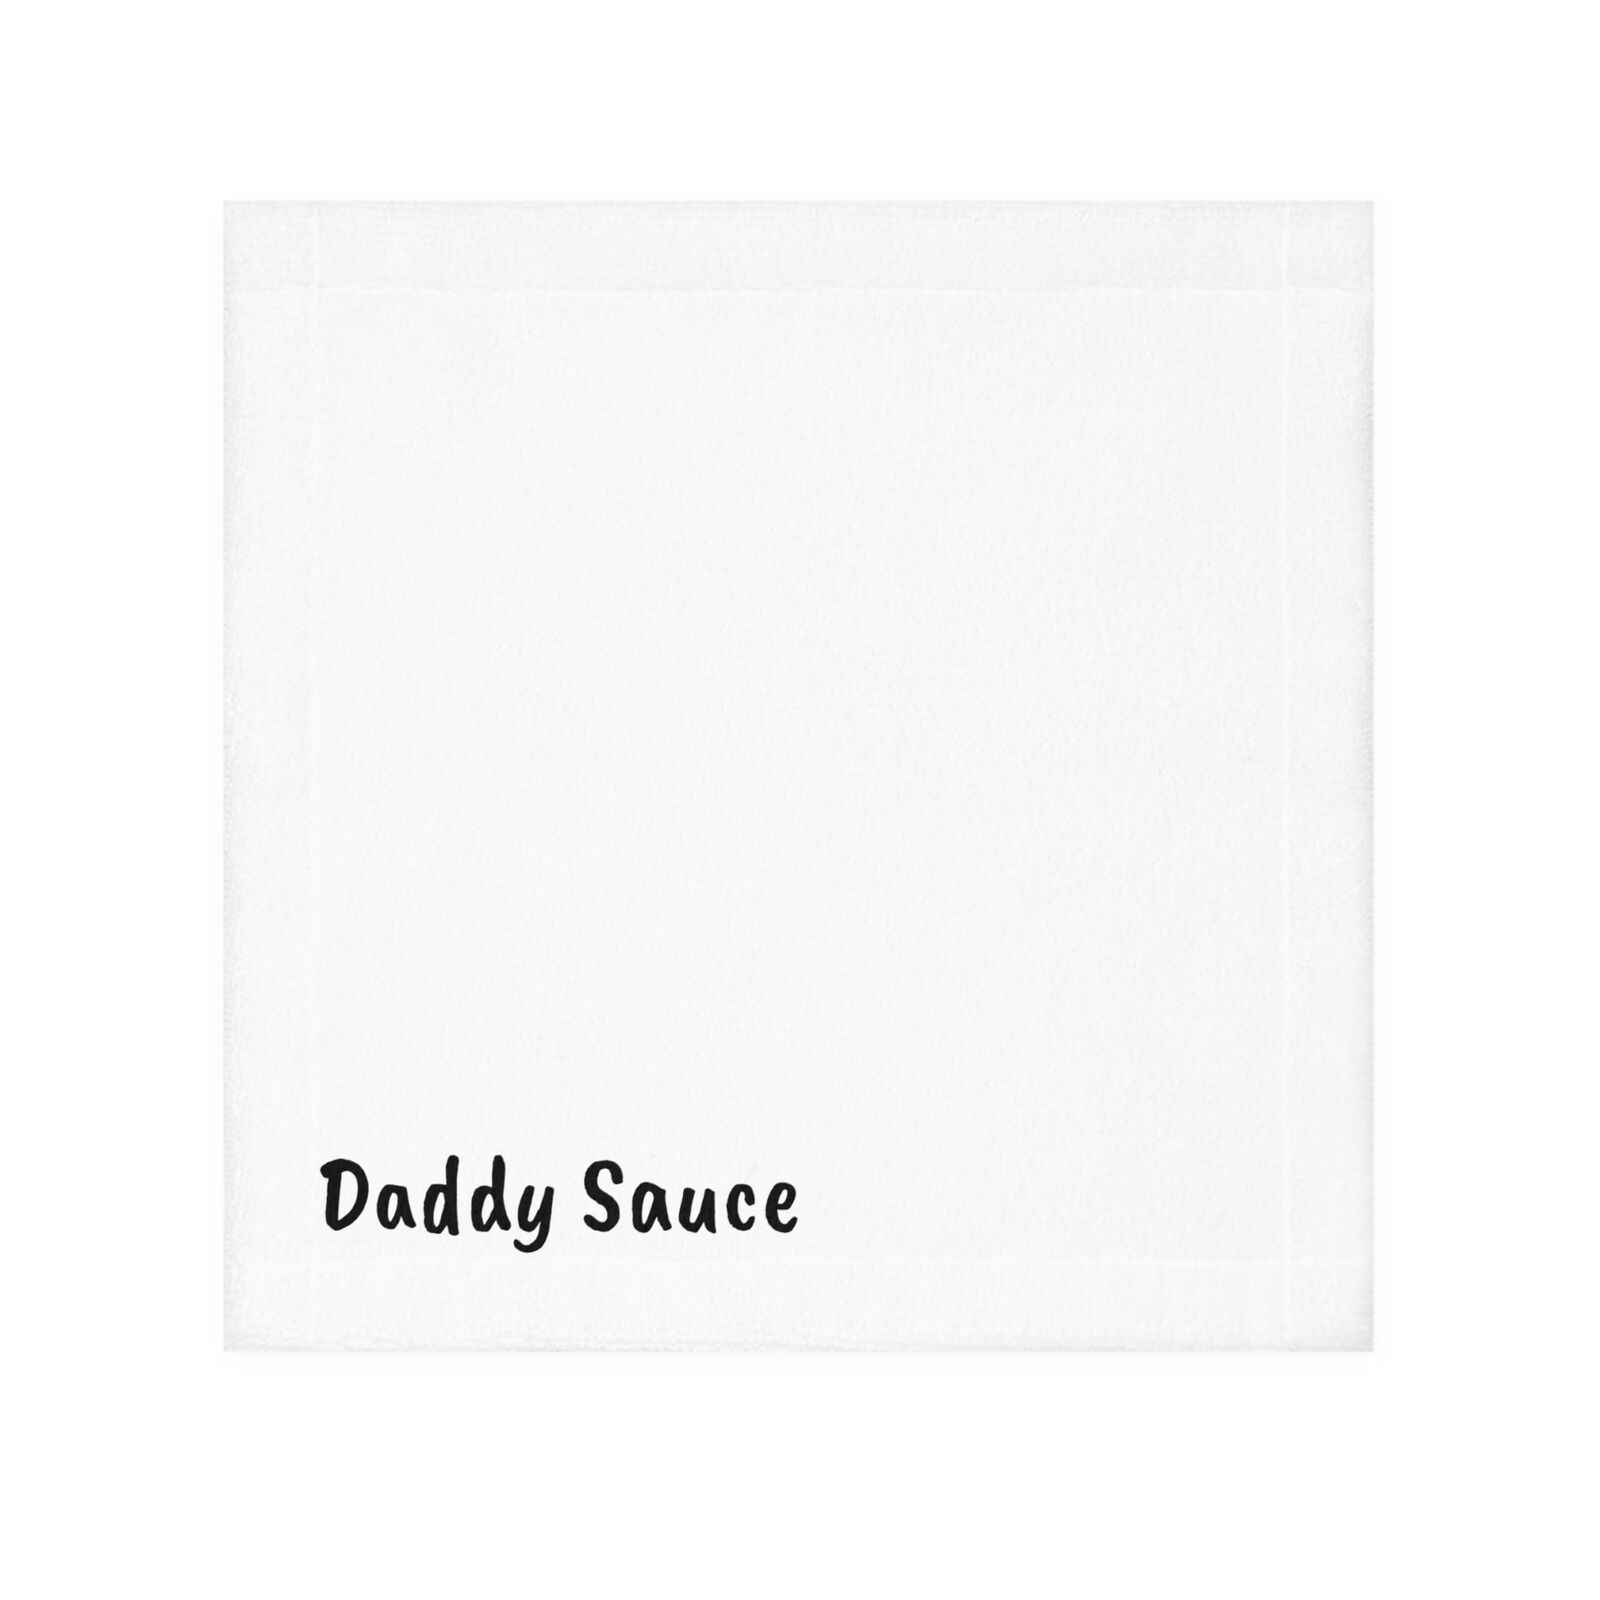 Daddy Sauce Cum Rag Naughty Gift For Boyfriend Bachelor Party Gift Humorous Gift